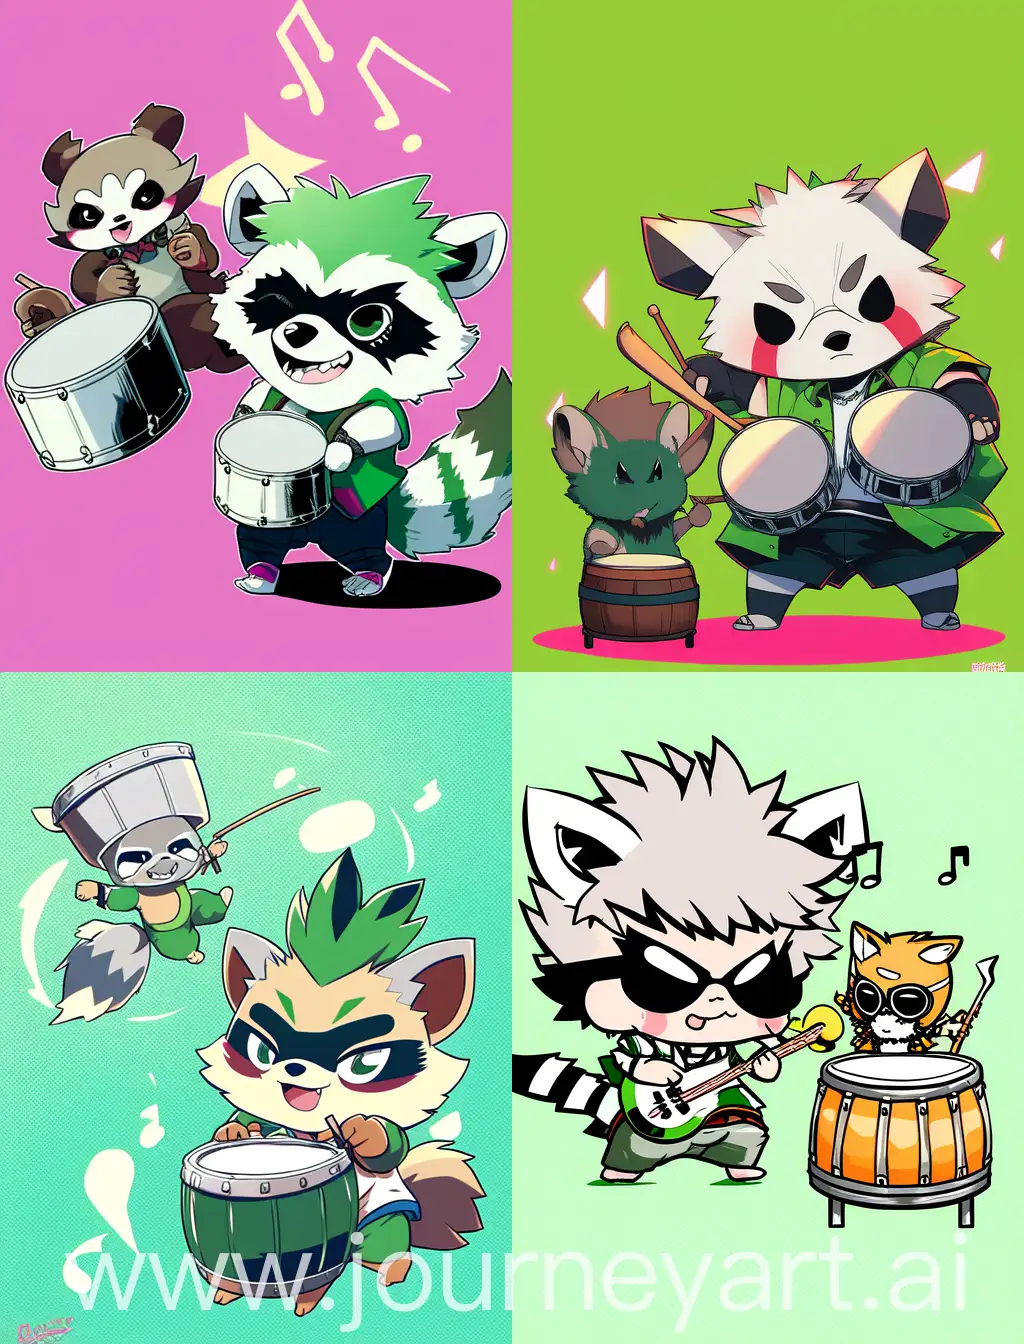 chibi racoon and anime guy playing drums, with green solid background, 